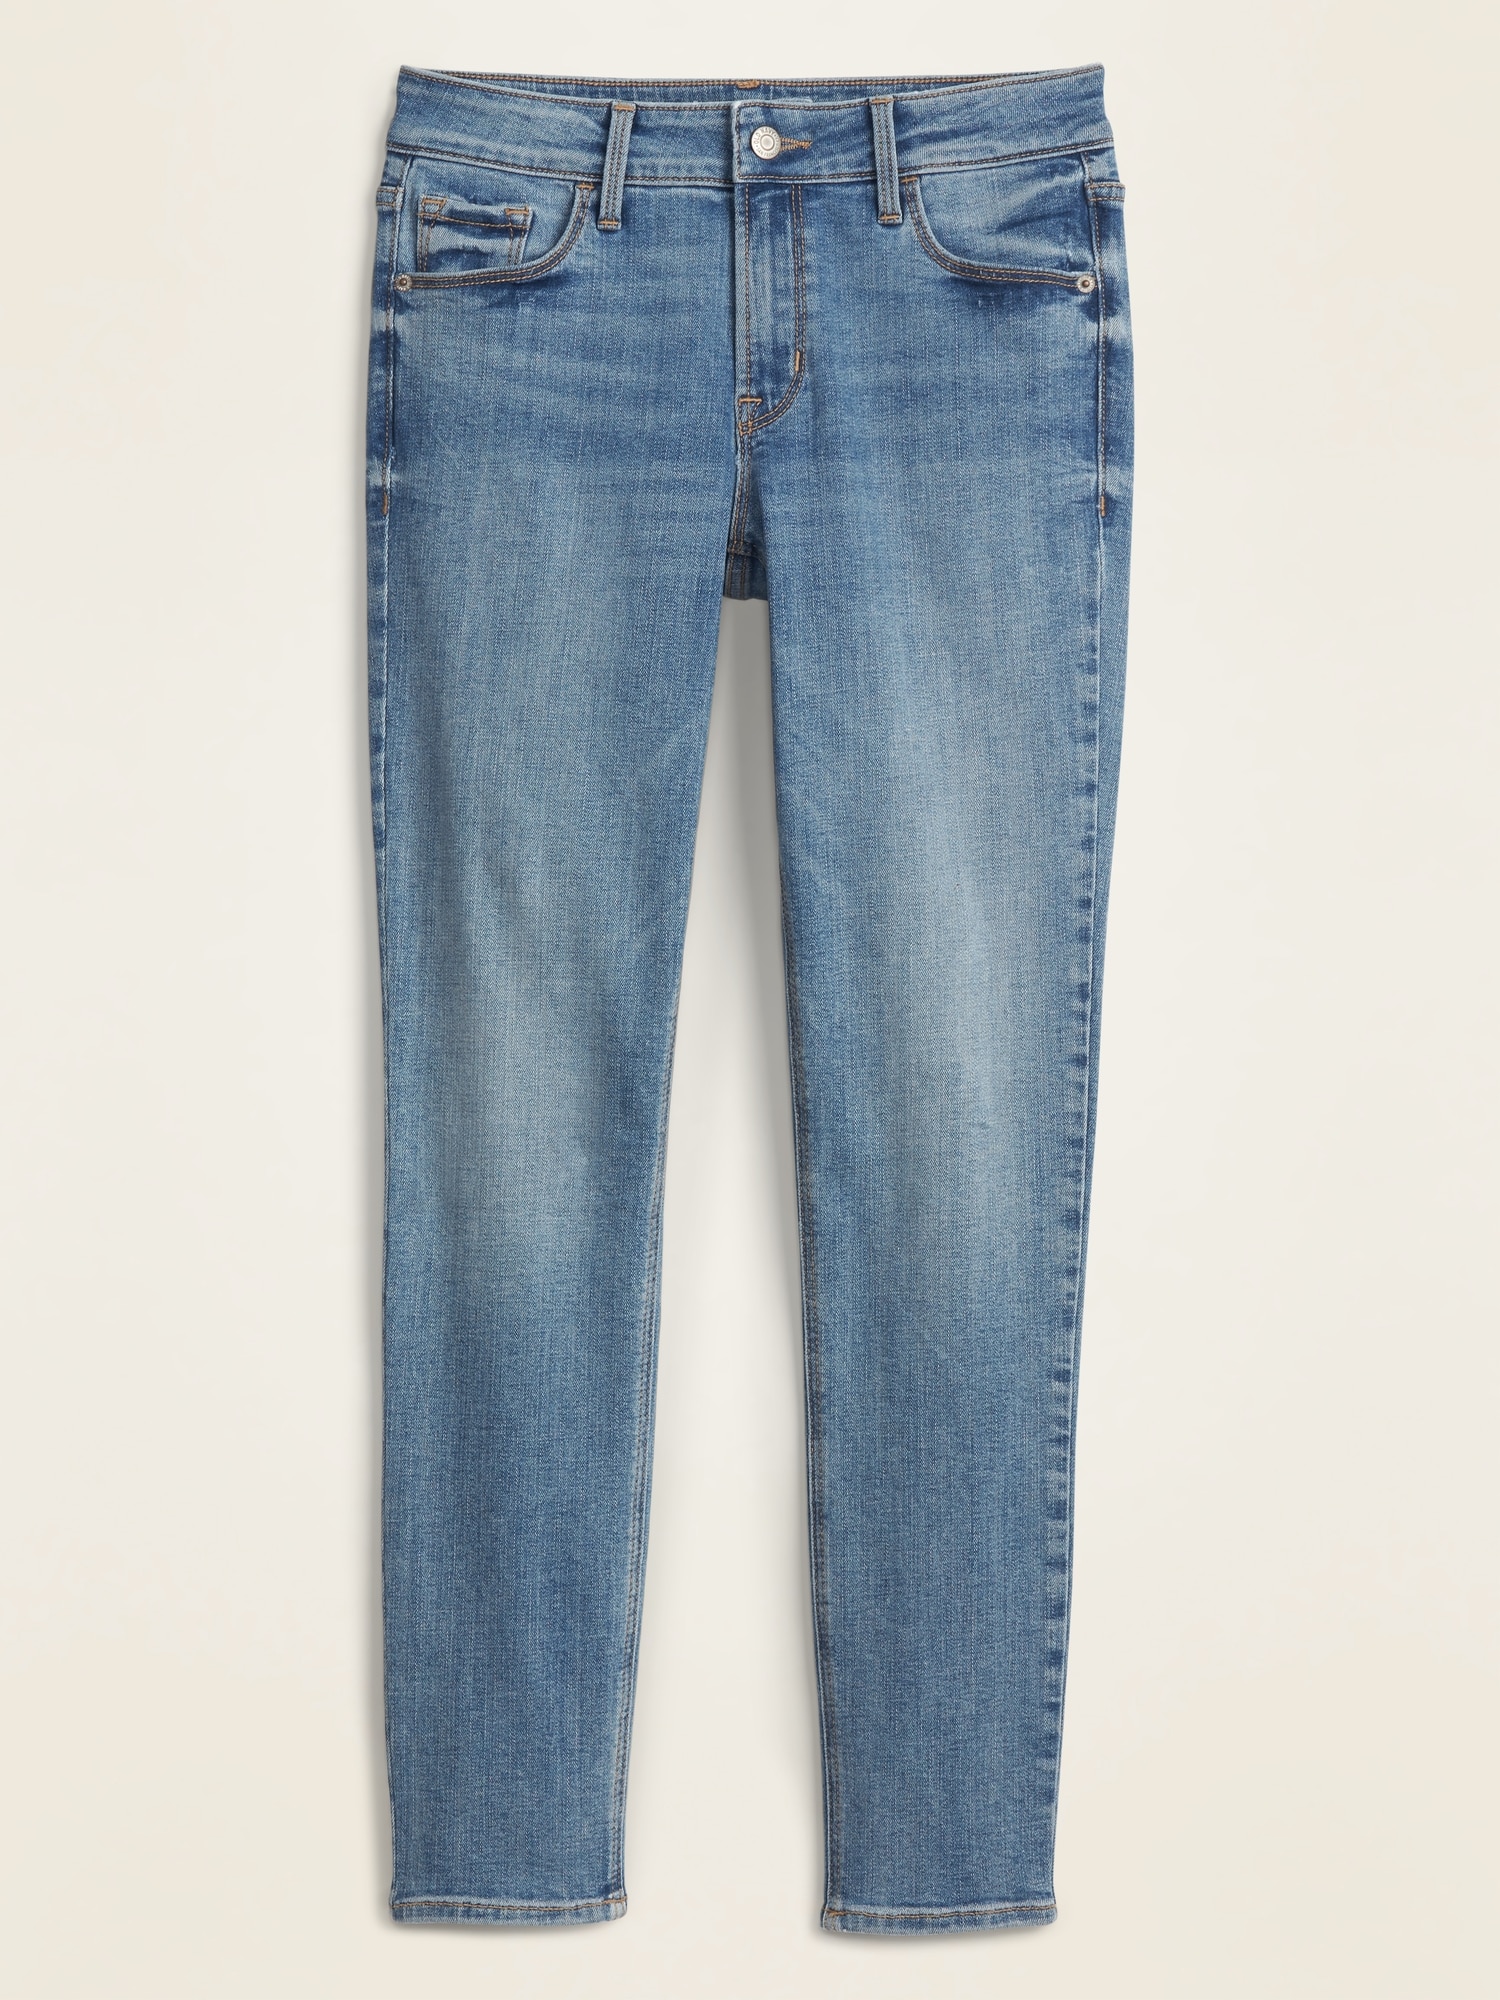 rockstar mid rise jeans old navy